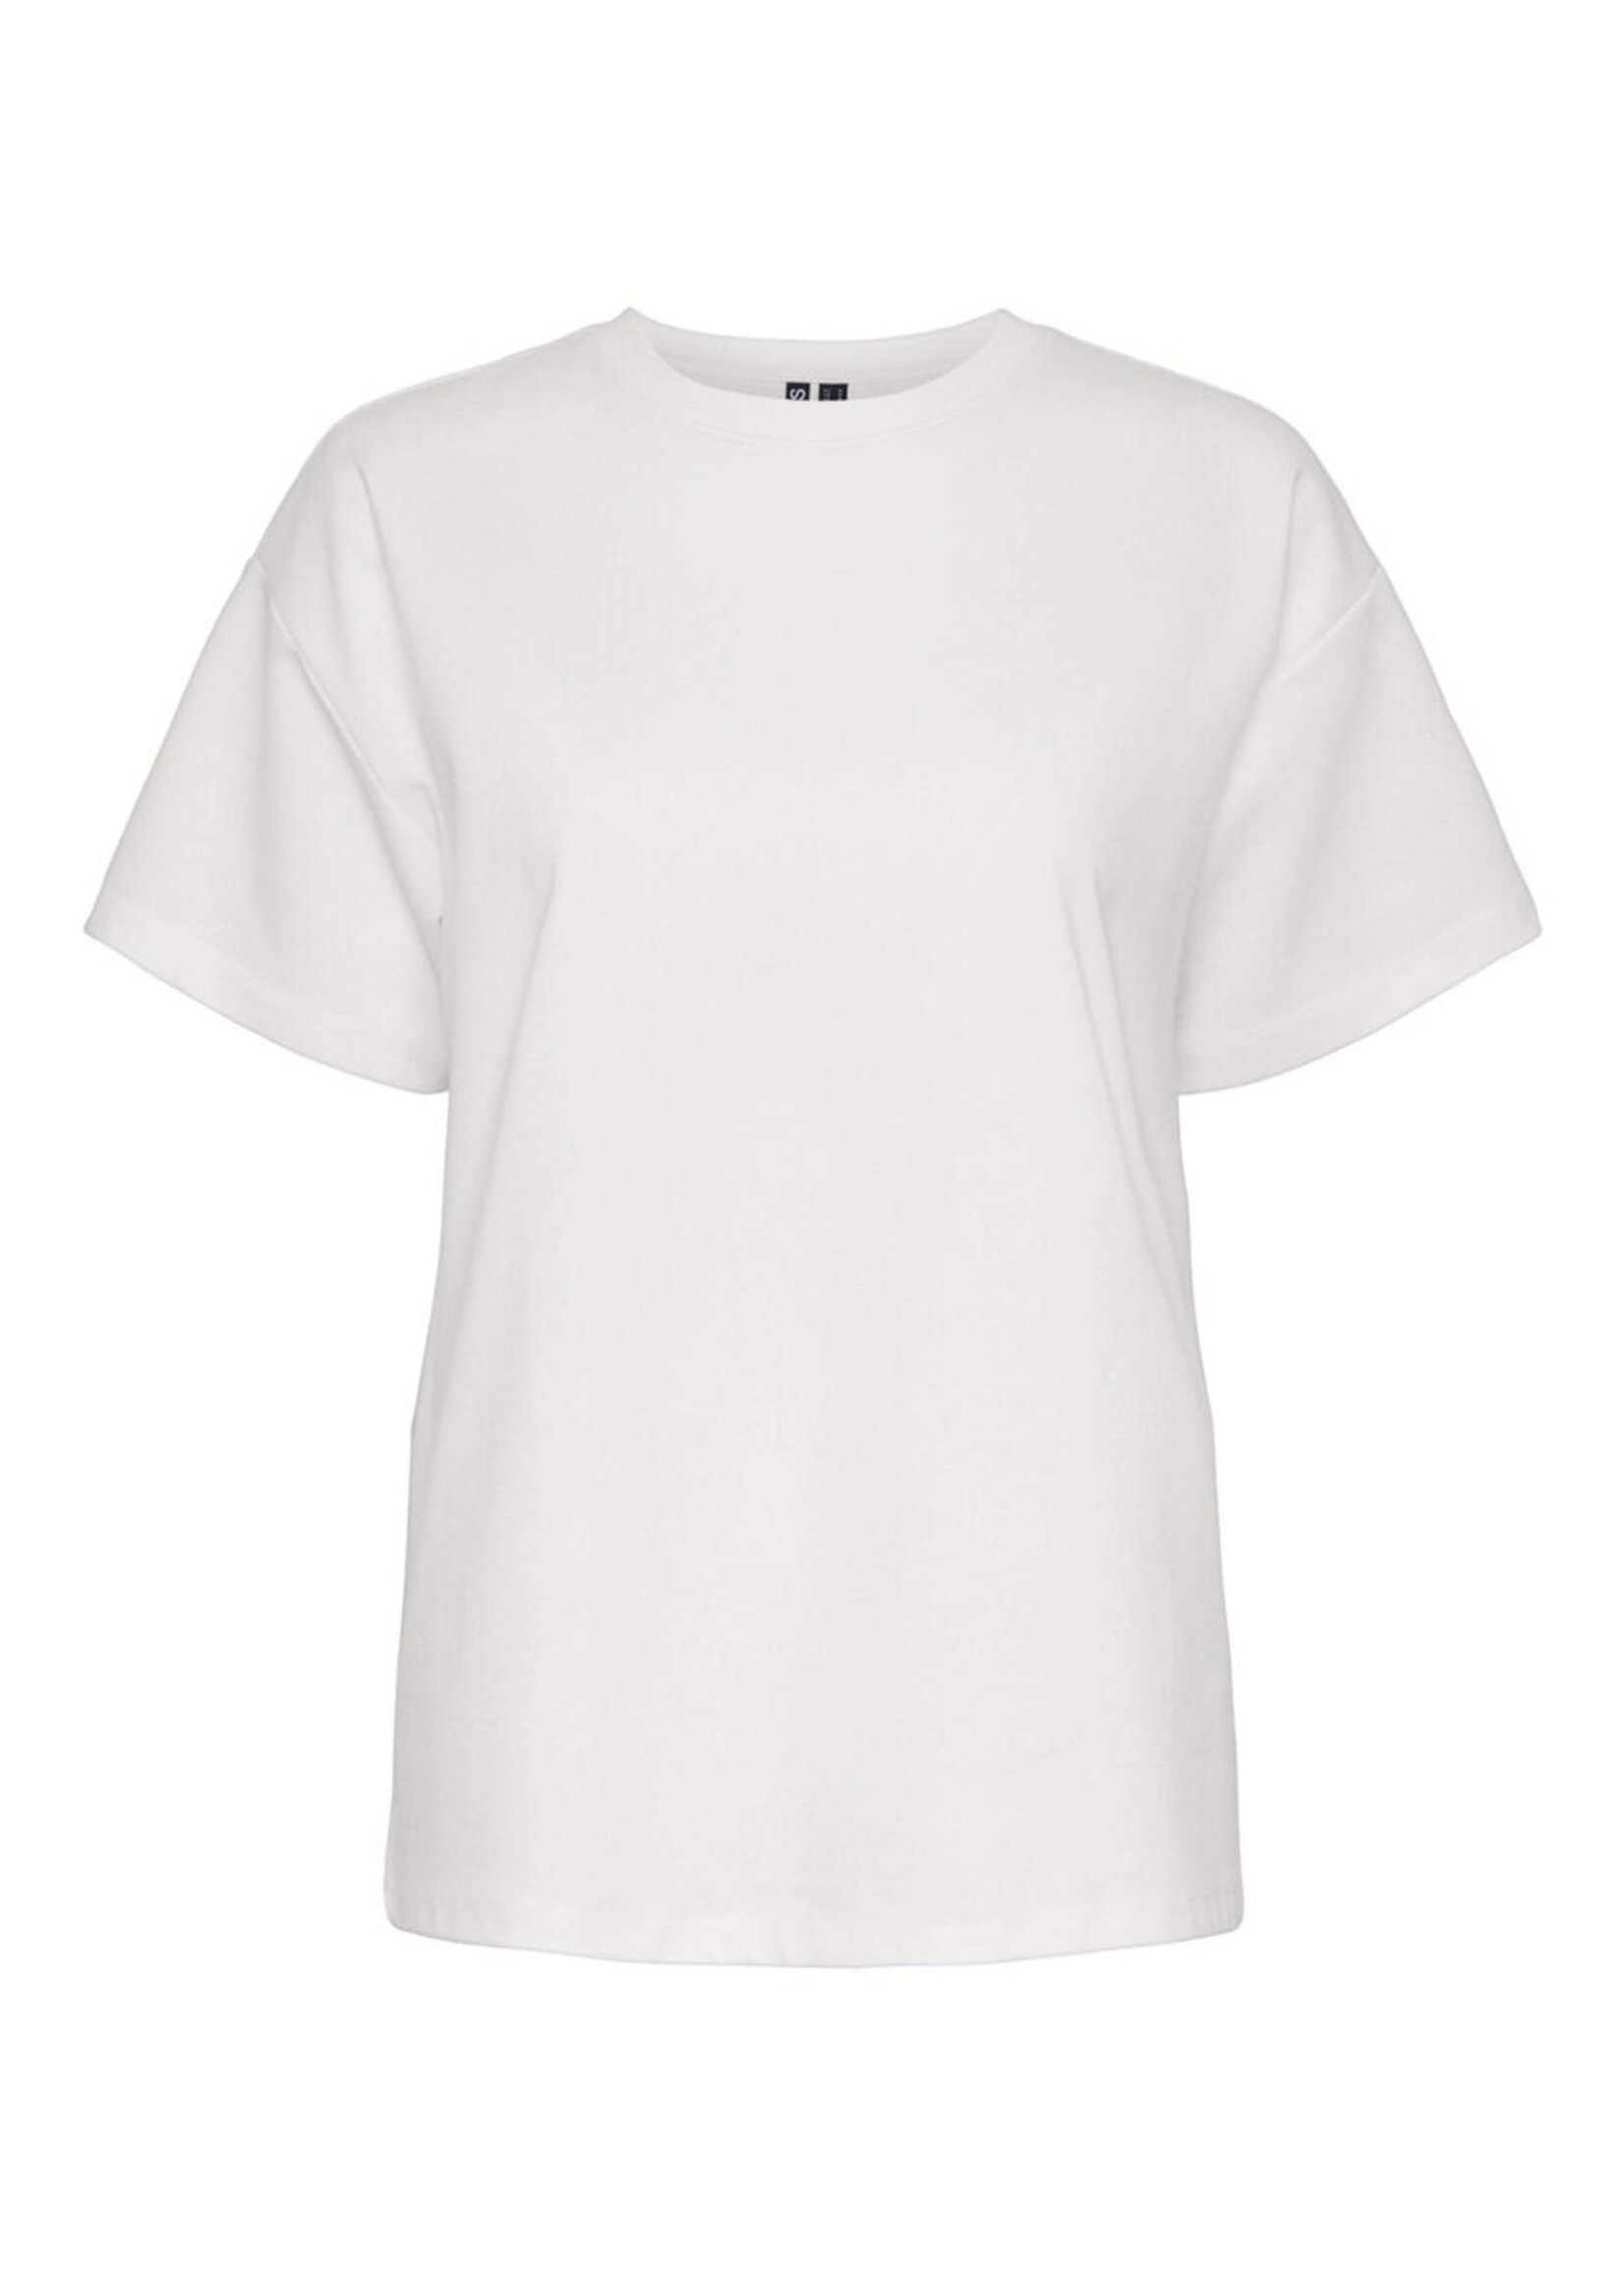 PIECES SKYLAR SS OVERSIZED TEE NOOS bright white